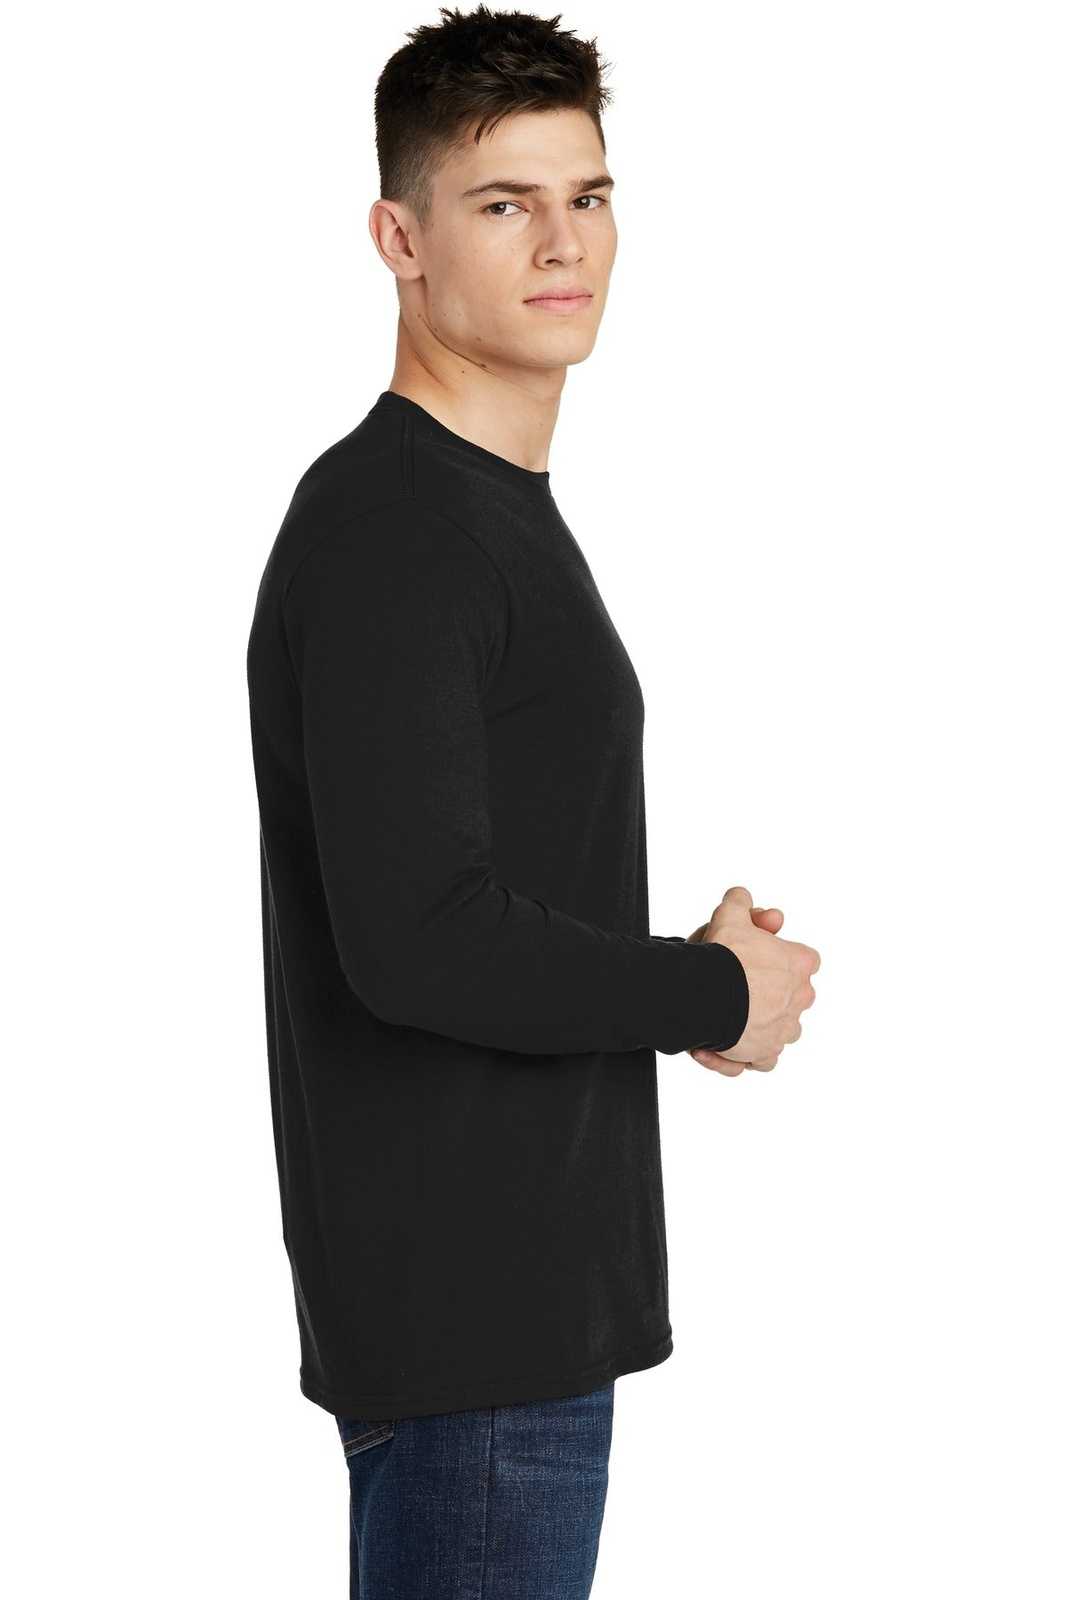 District DT6200 Very Important Tee Long Sleeve - Black - HIT a Double - 3